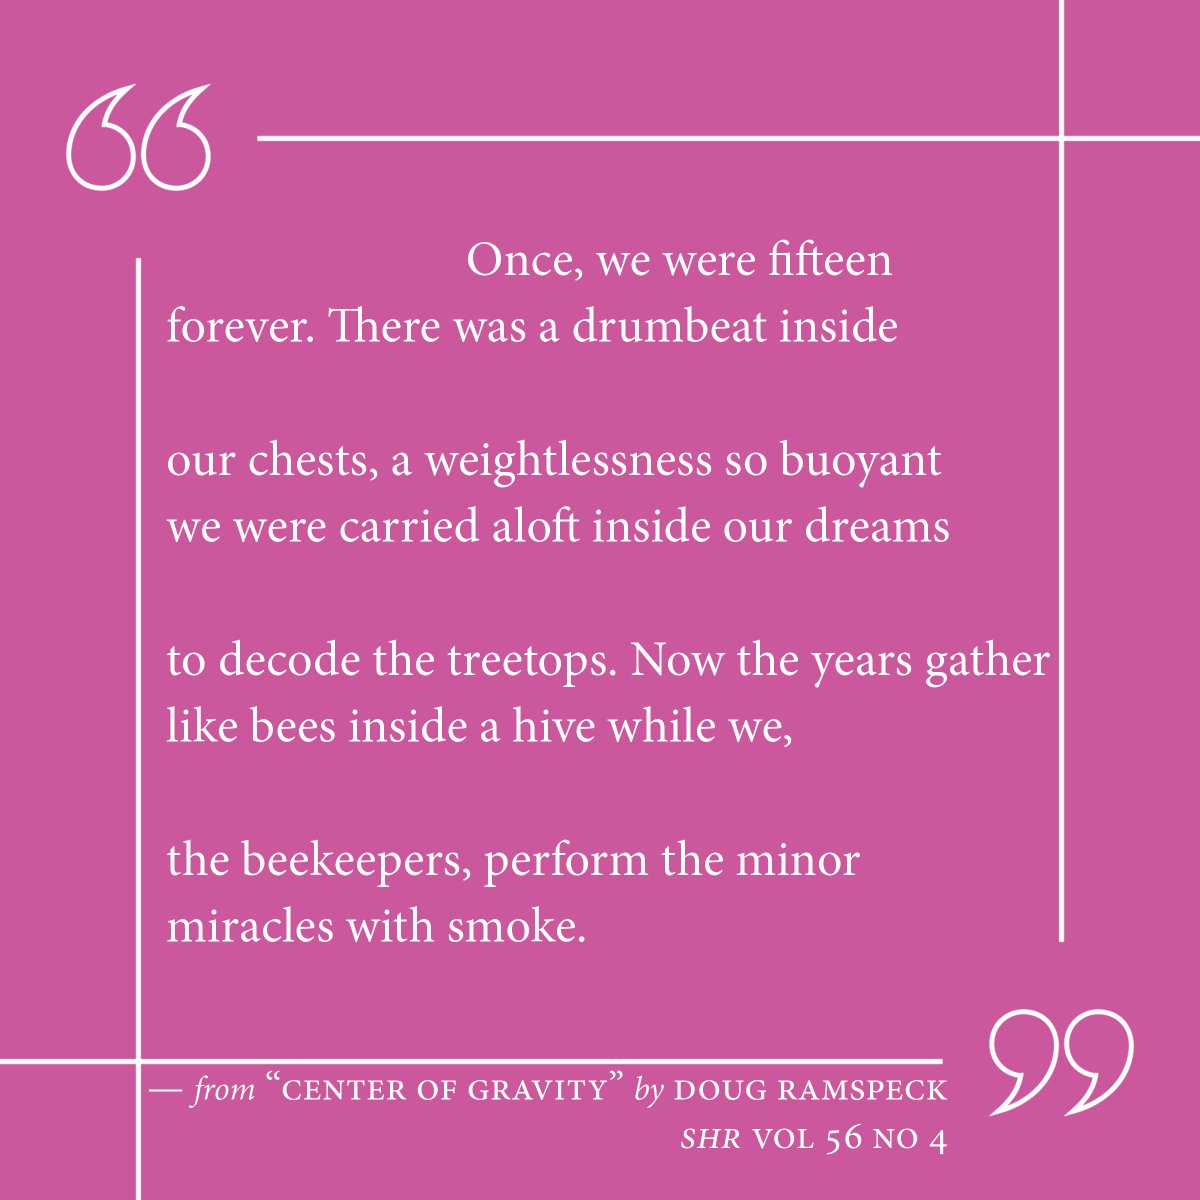 Perform minor miracles in 'Center of Gravity' by Doug Ramspeck. Read more poetry from our winter issue here: southernhumanitiesreview.com/current-issue.… #WritingCommunity #litmag #poetrycommunity #poetry